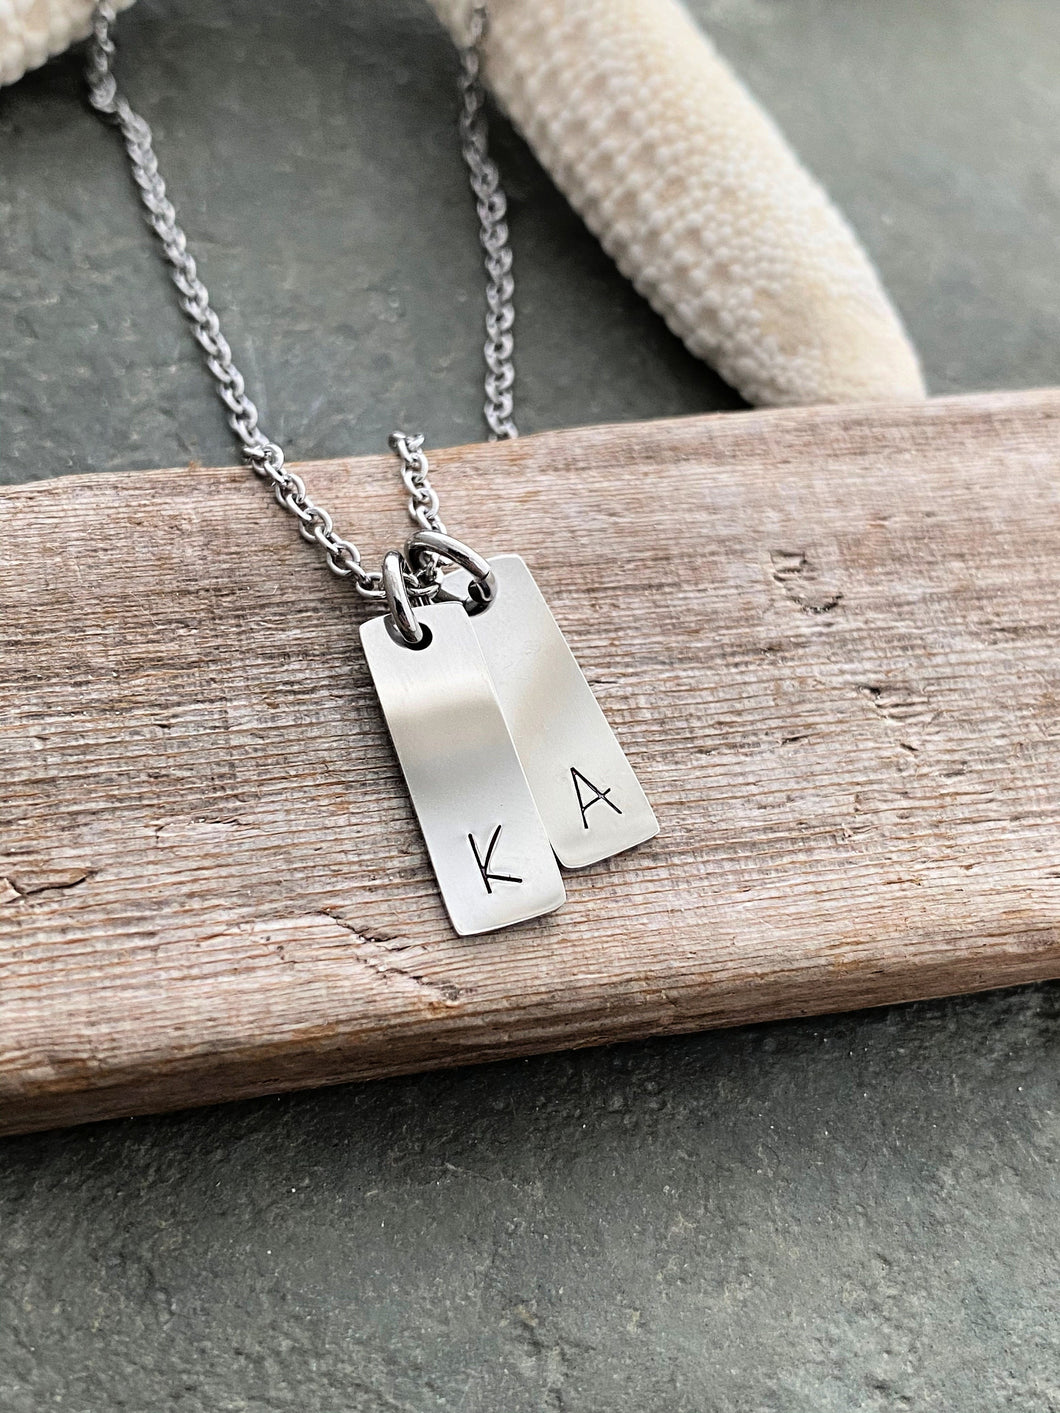 Personalized  Mini Initial Bar Jewelry, Stainless Steel Multiple Mini Initial Necklace - Tiny Bar necklace -  customized gift for her